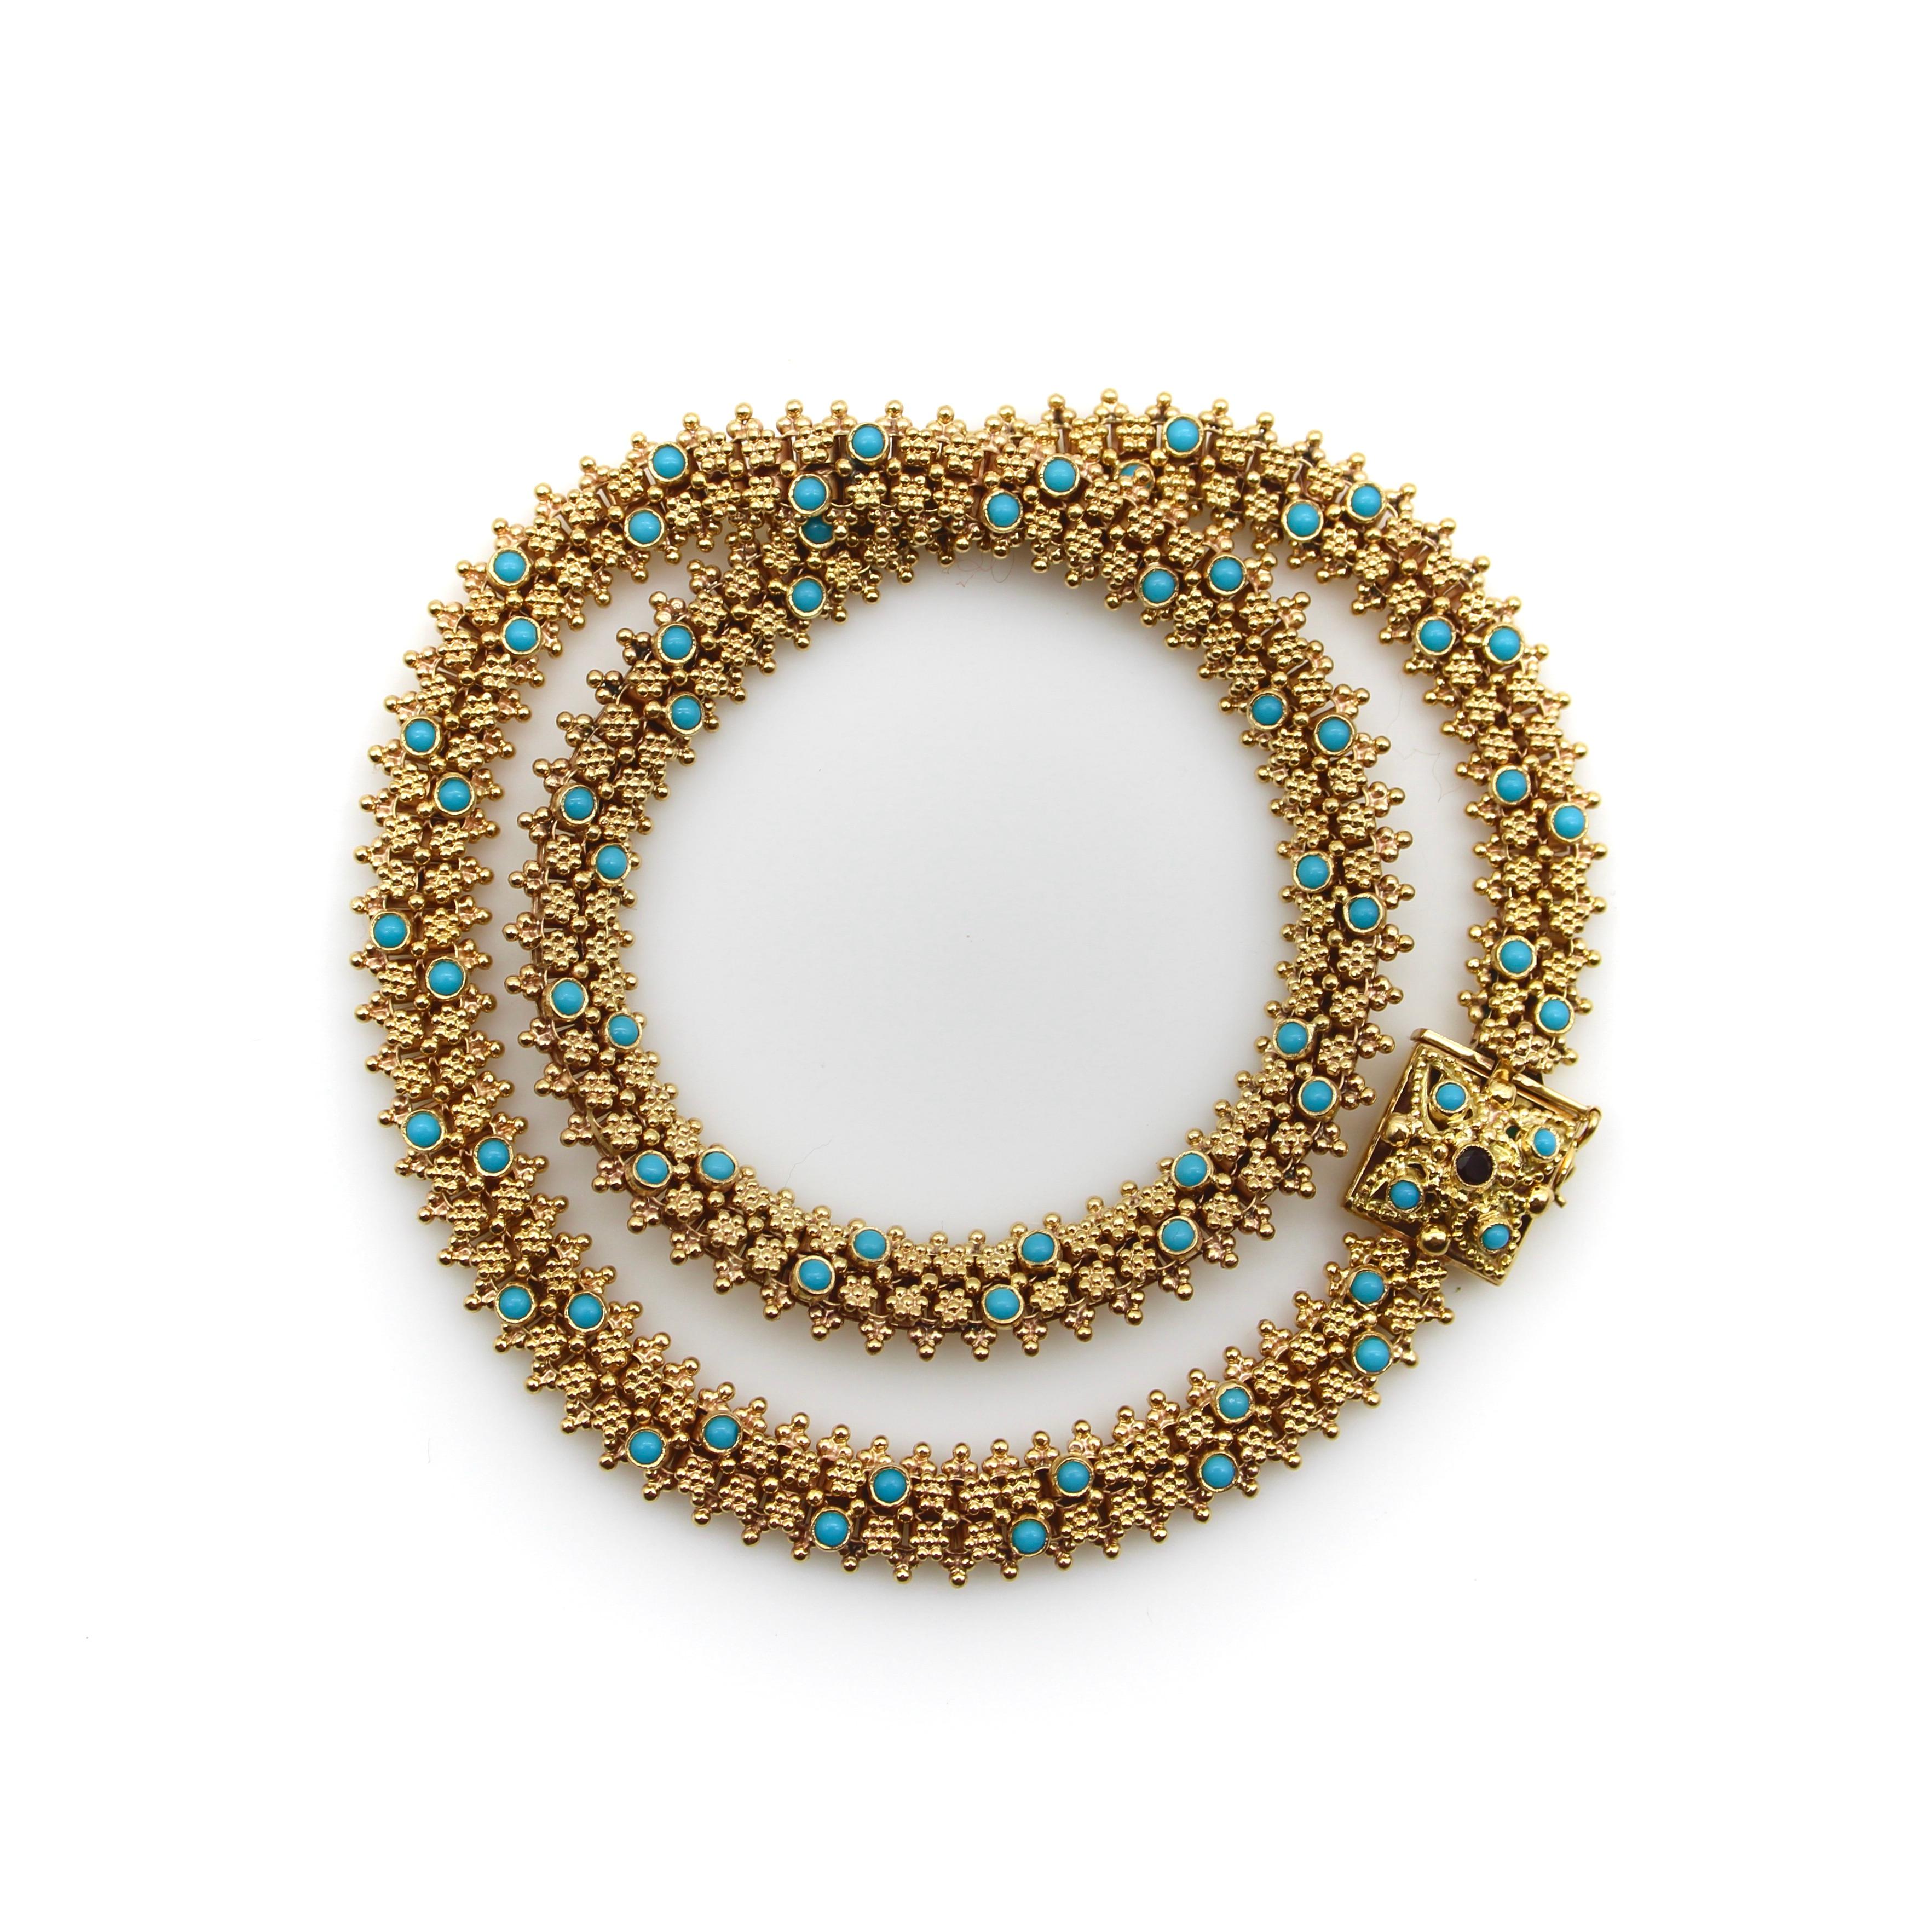 Etruscan Revival Portuguese Cannetille 19.2K Gold & Turquoise Necklace For Sale 1